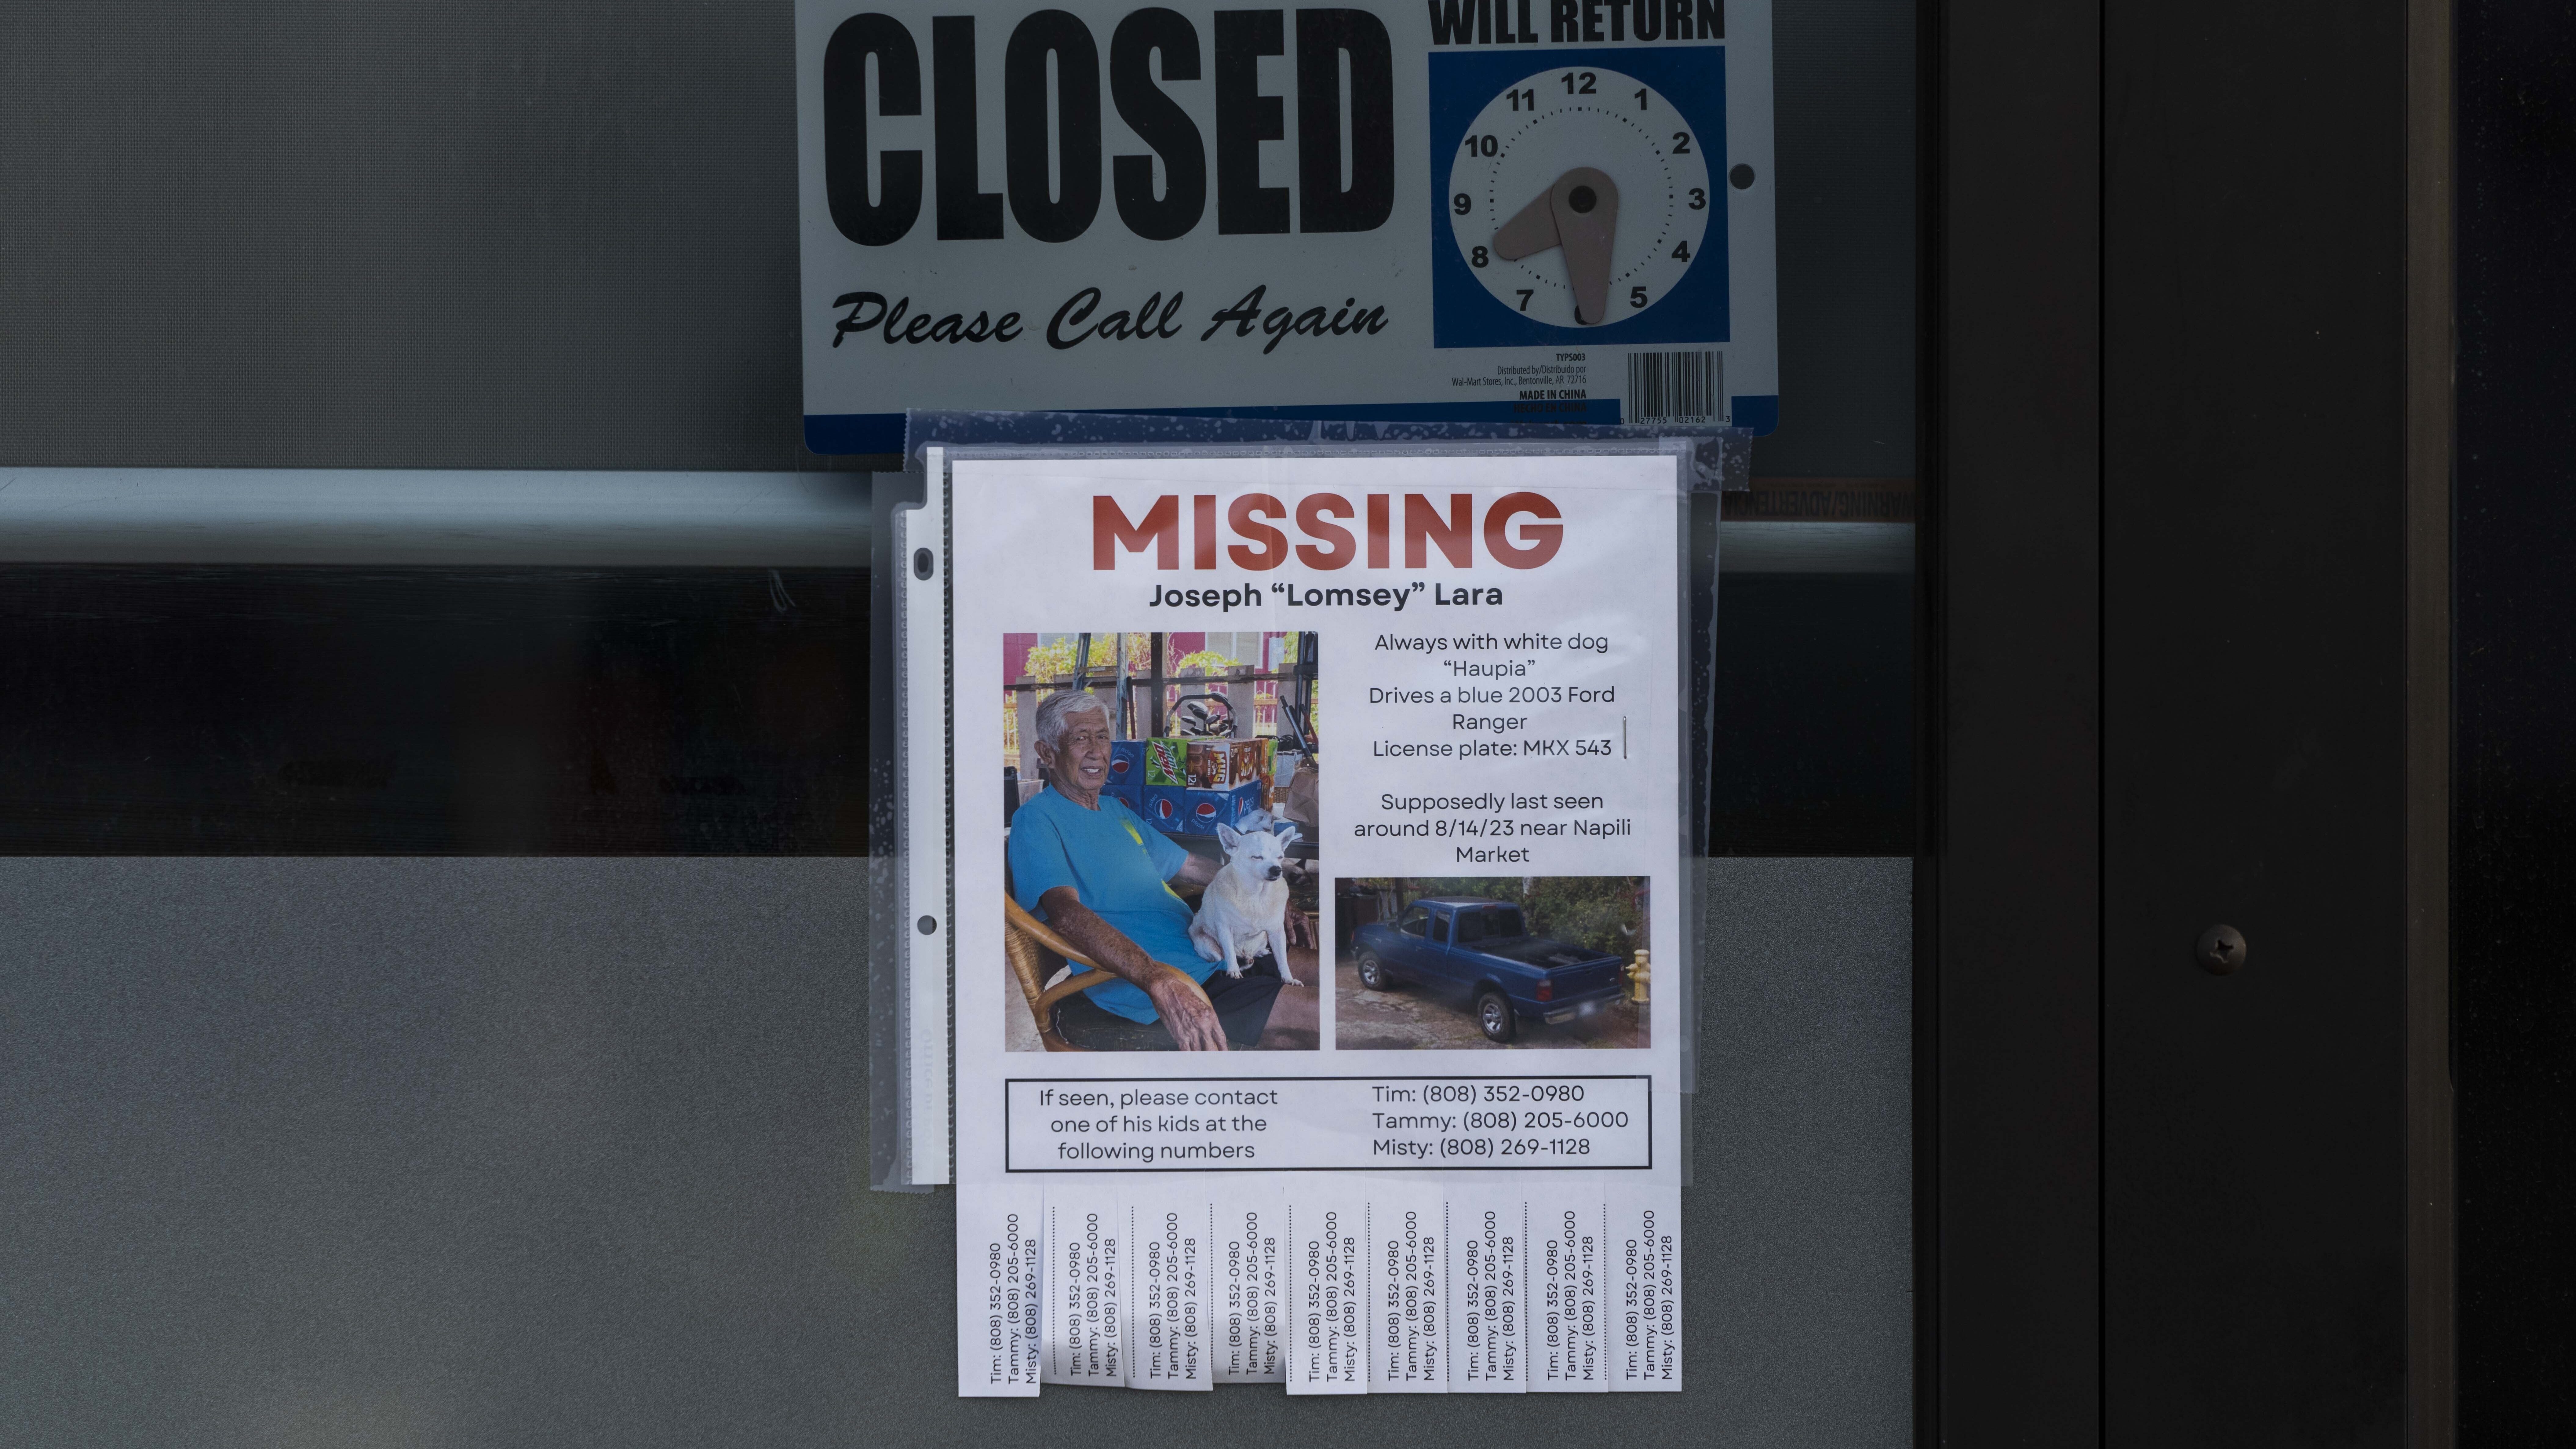 A missing person flyer for Joseph "Lomsey" Lara is posted on the door of a business in a shopping m...